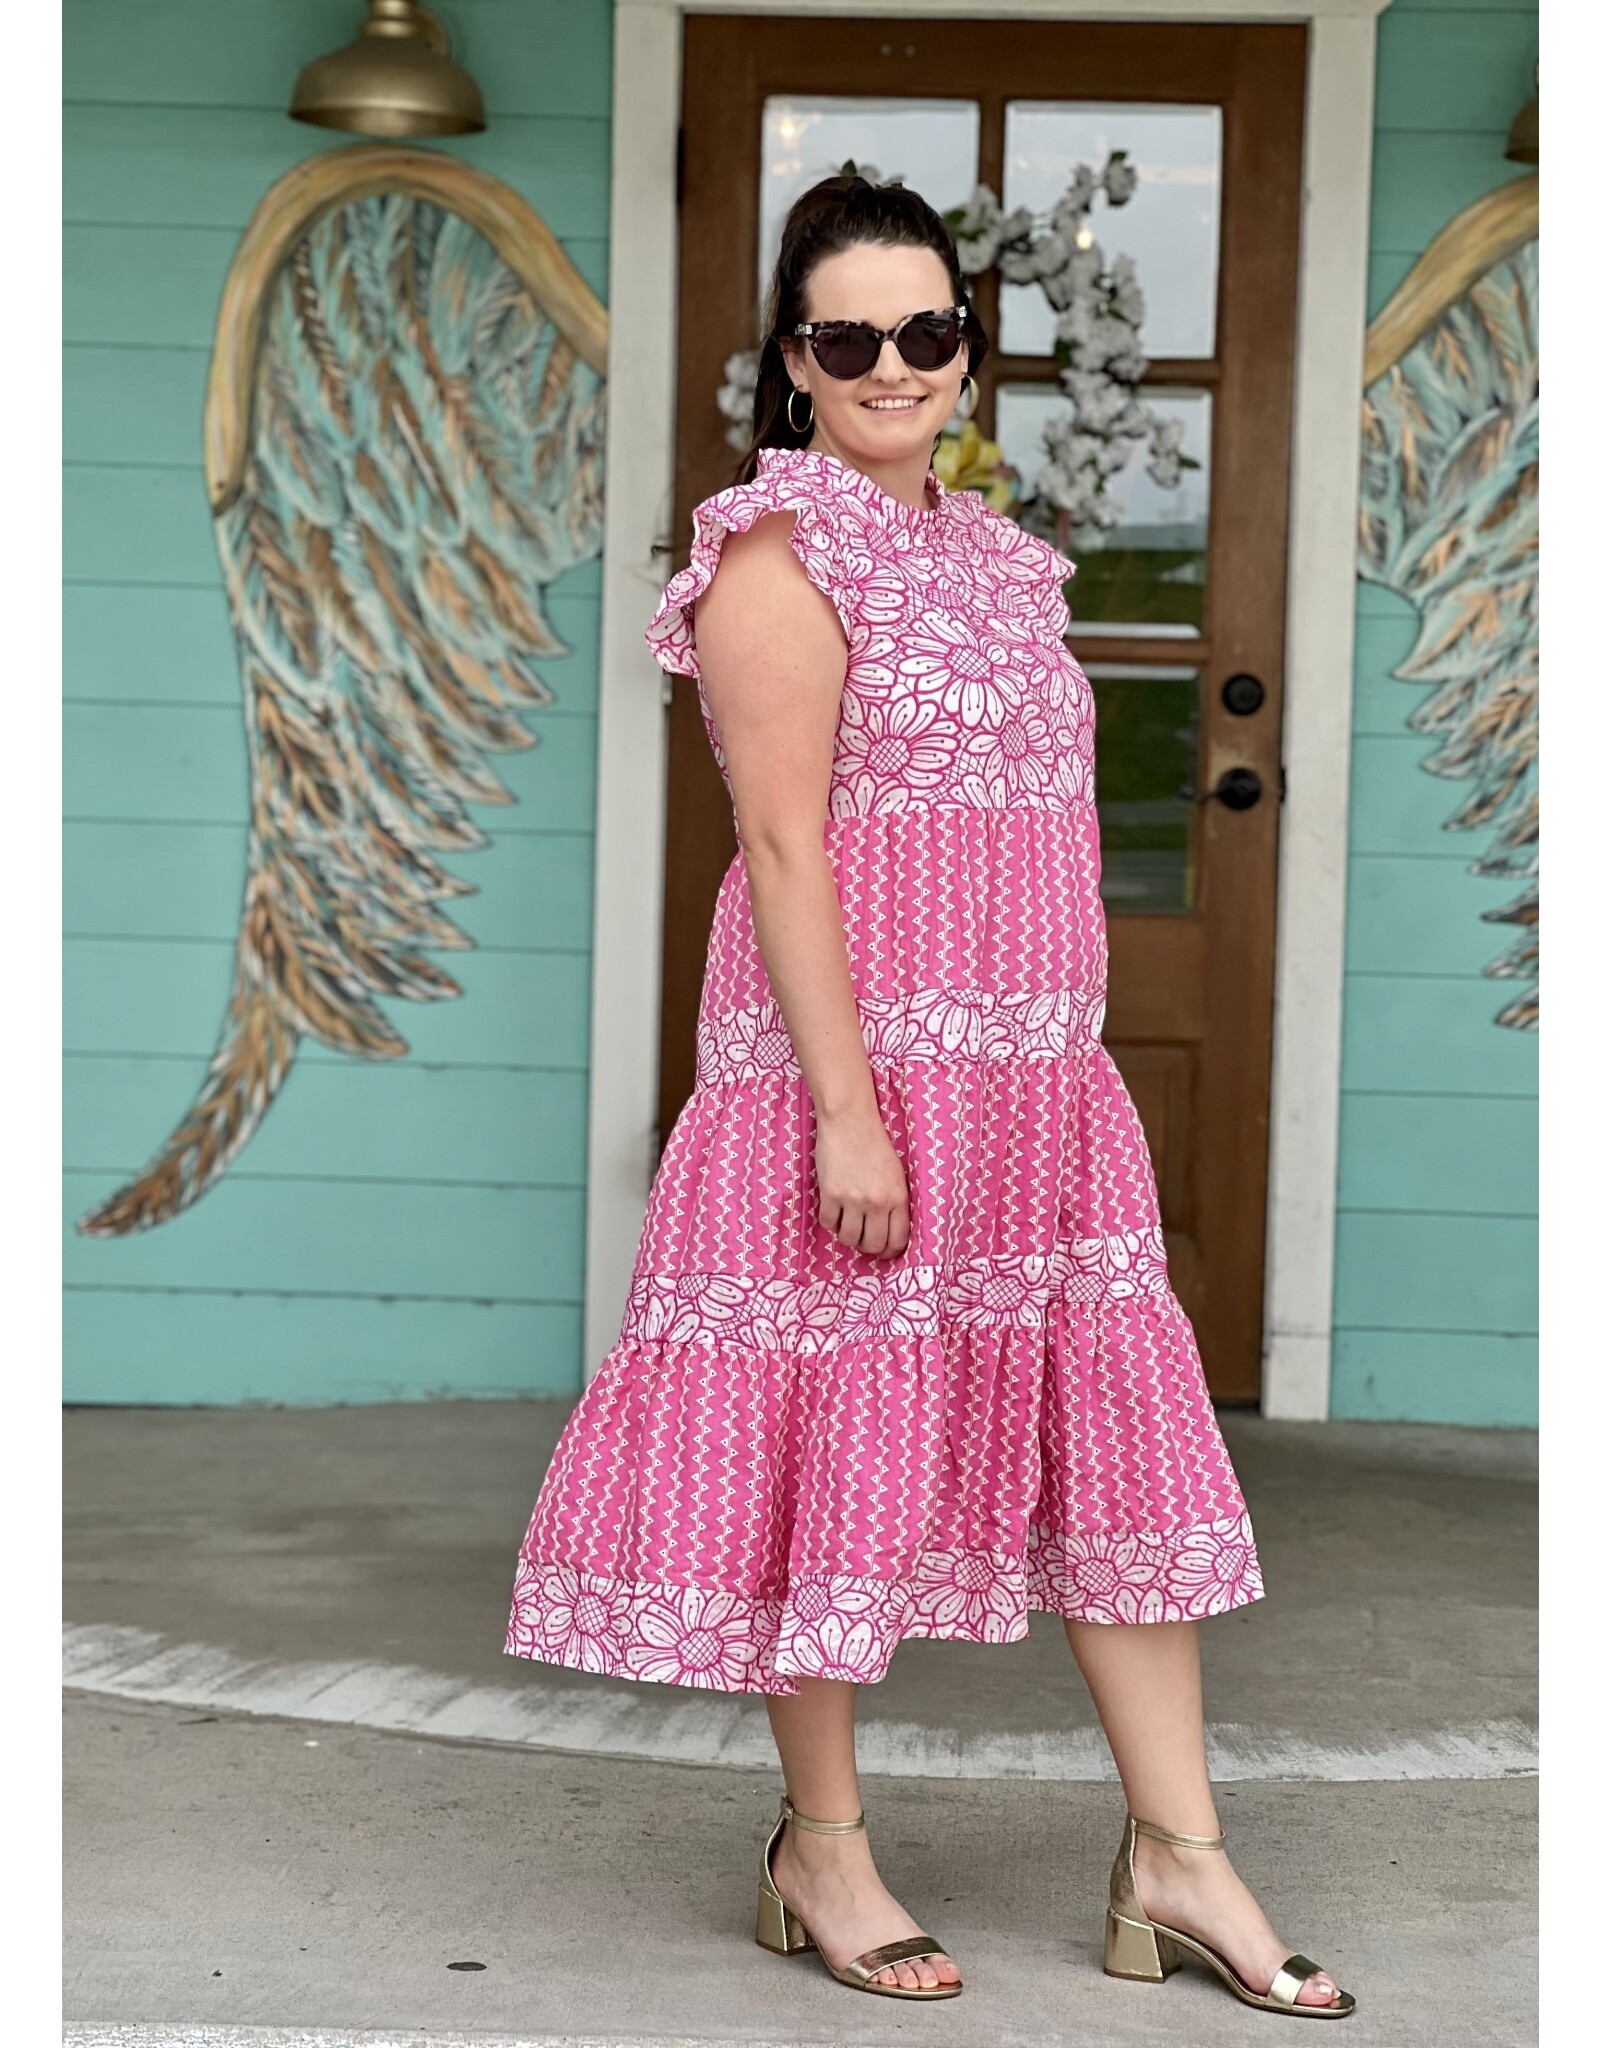 Pink Embroidered Pattern Tiered Dress